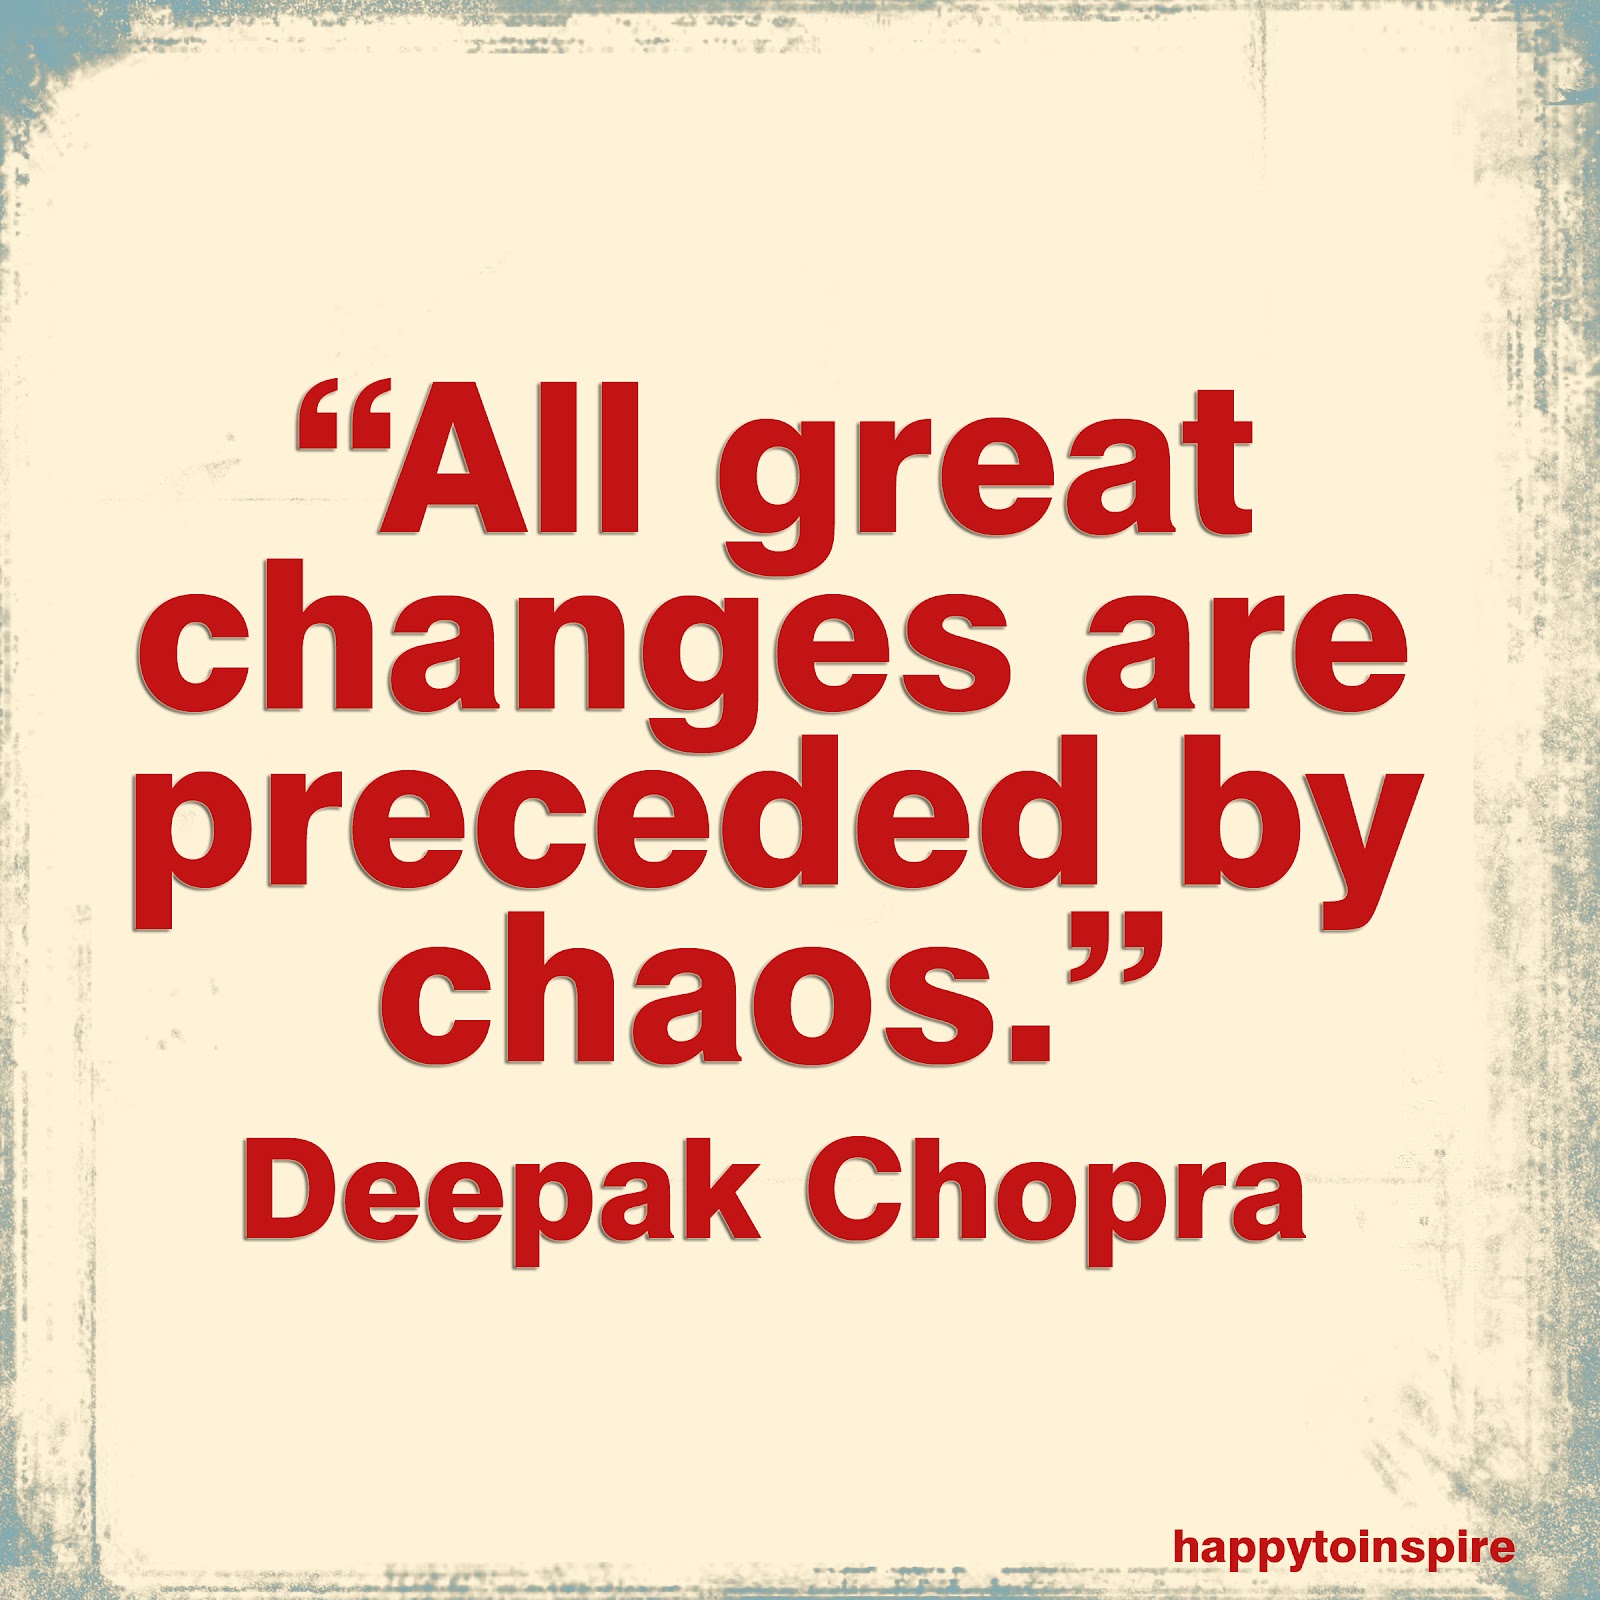 quote about change being good